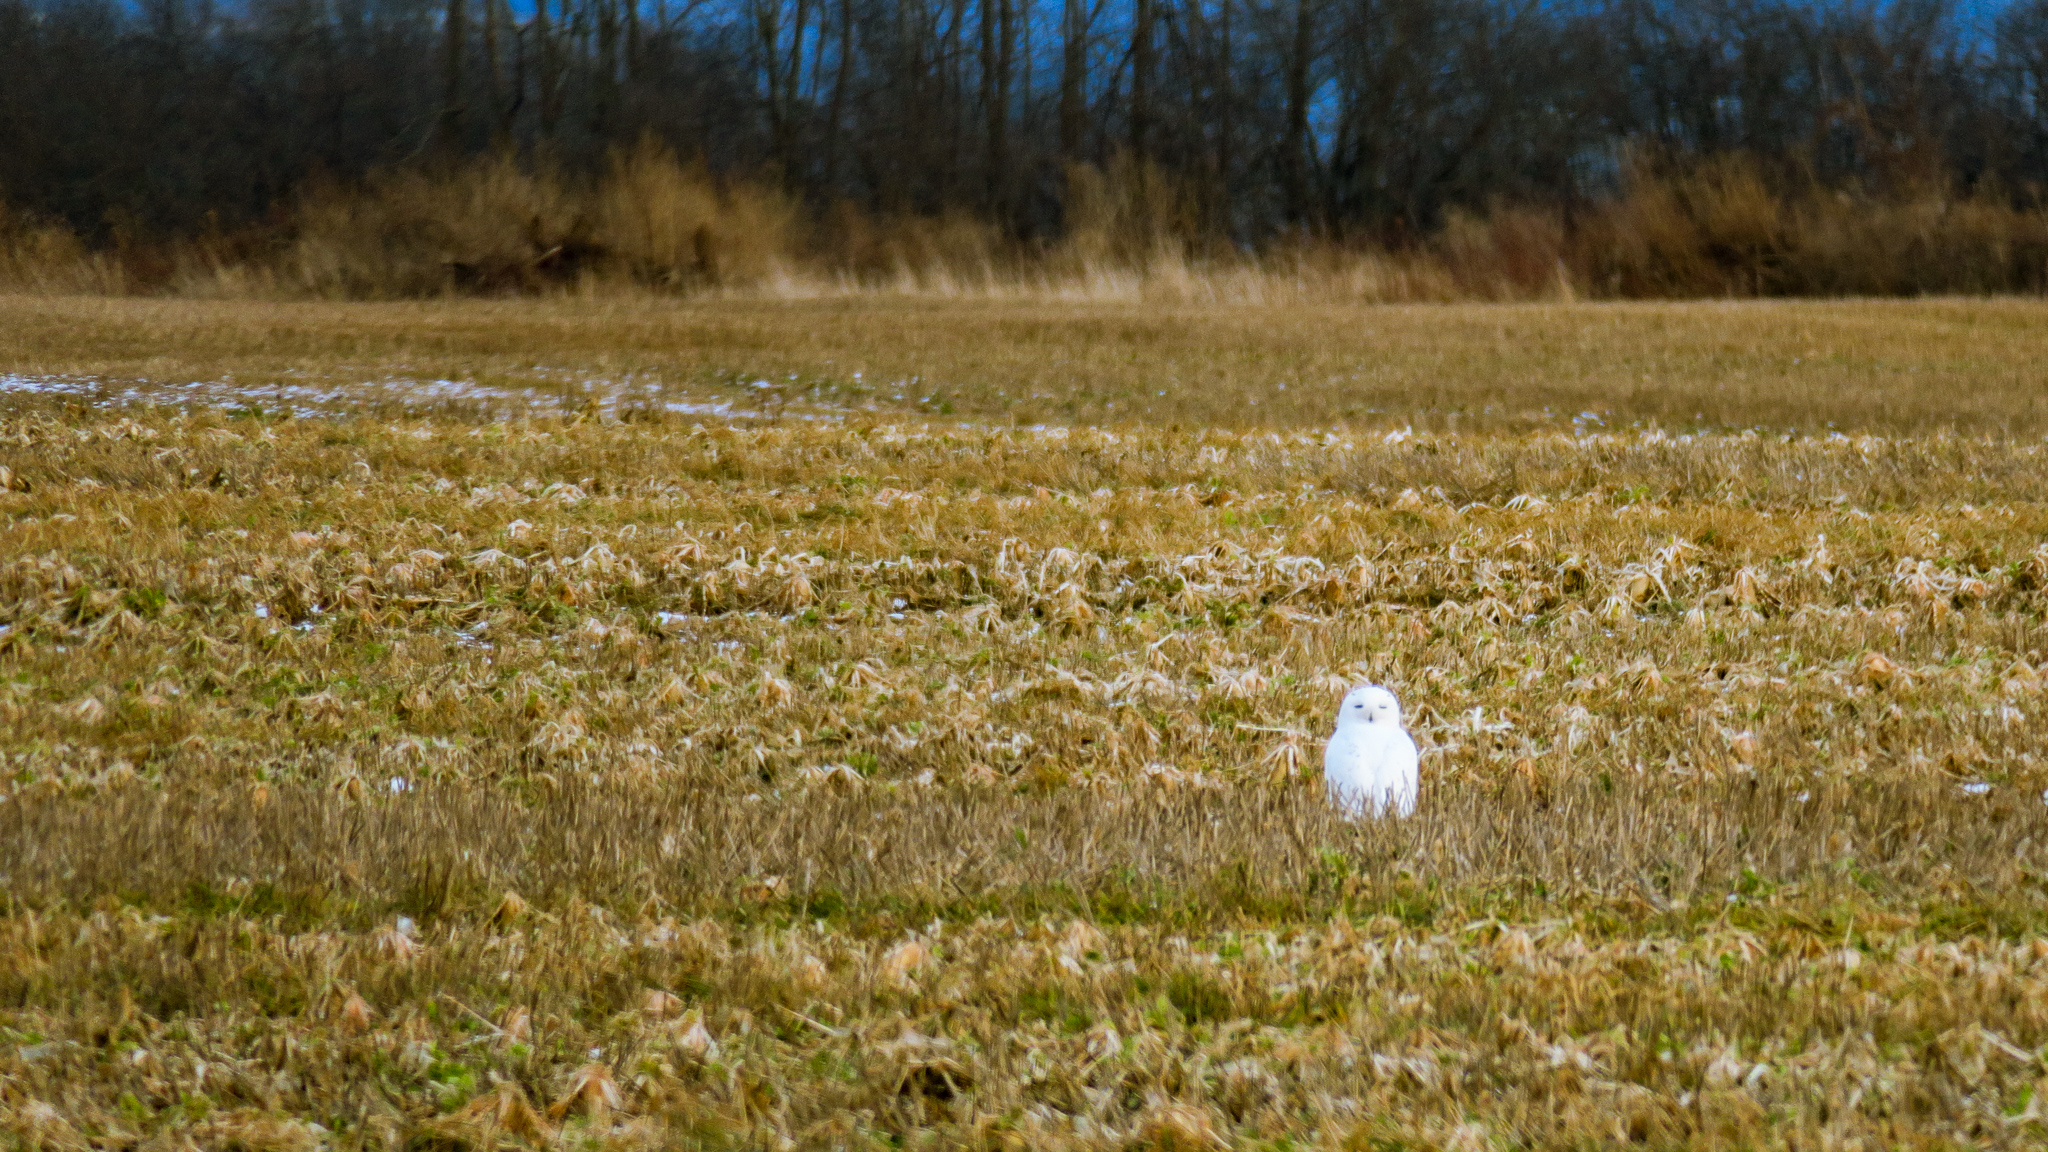 Snowy Owl in a cornfield in upstate New York